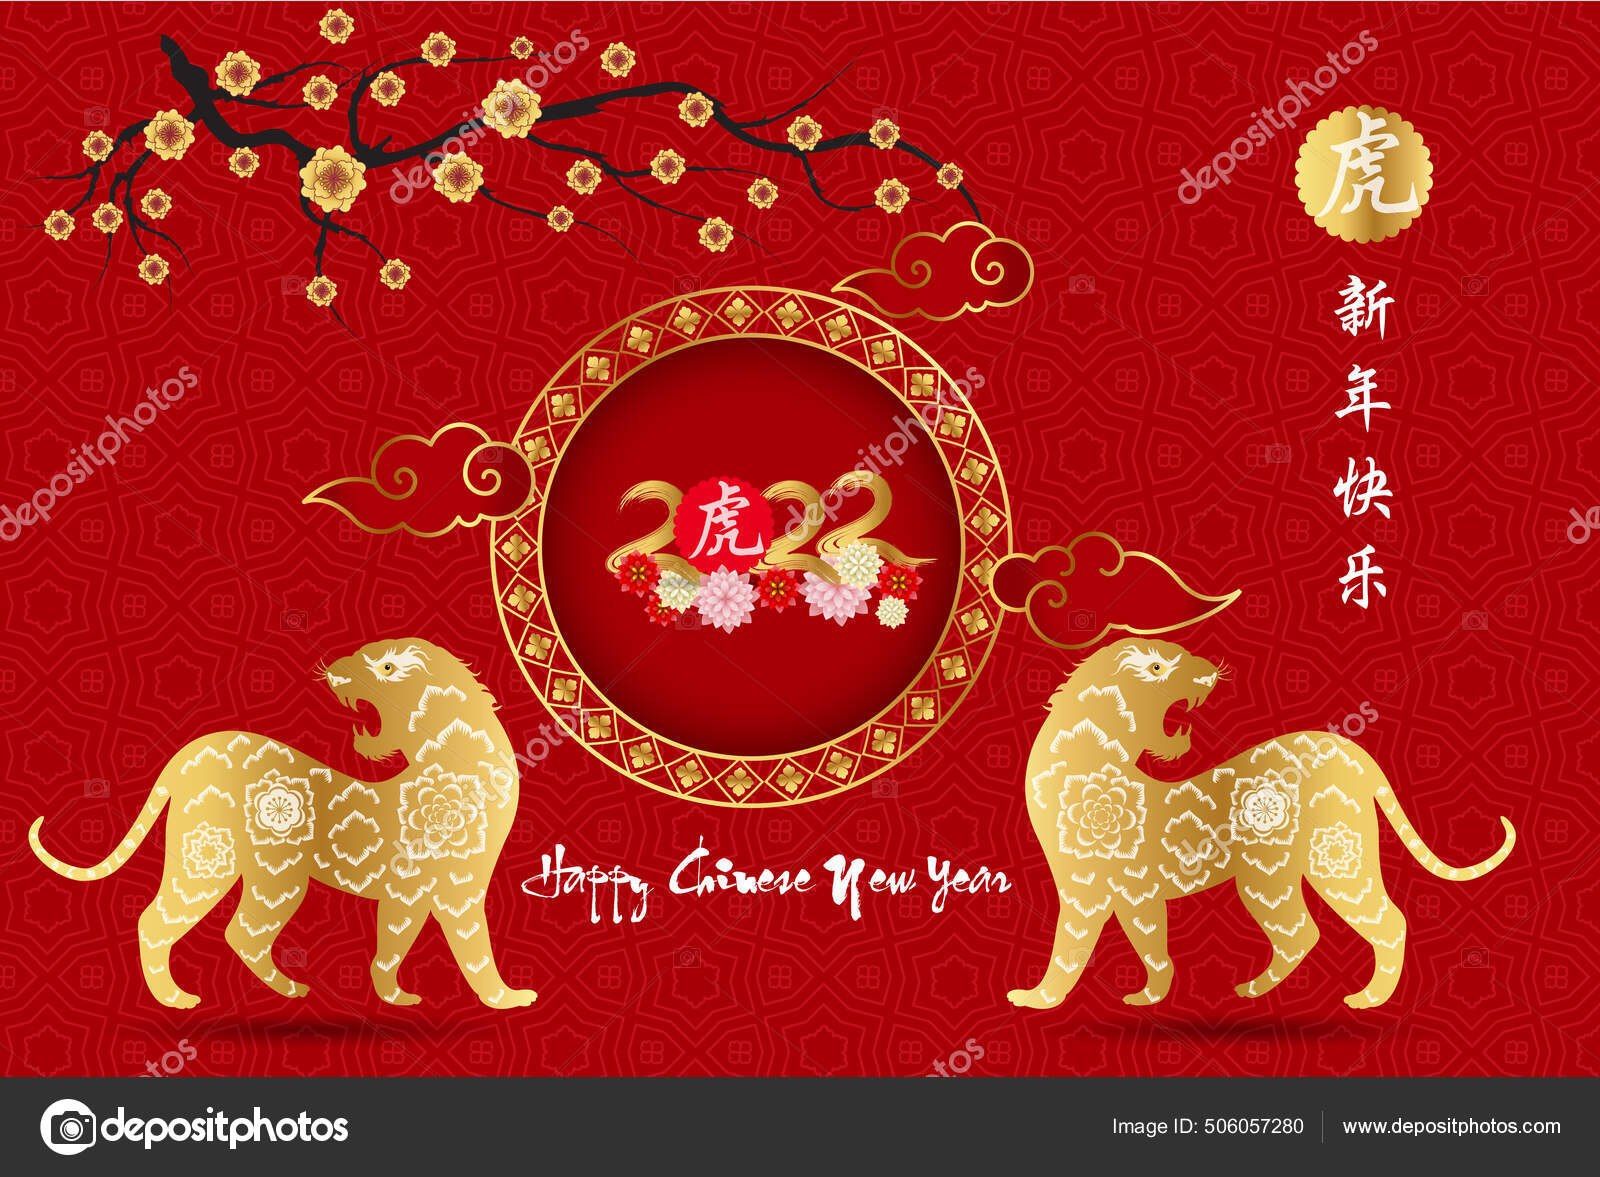 Chinese New Year 2022 Ends